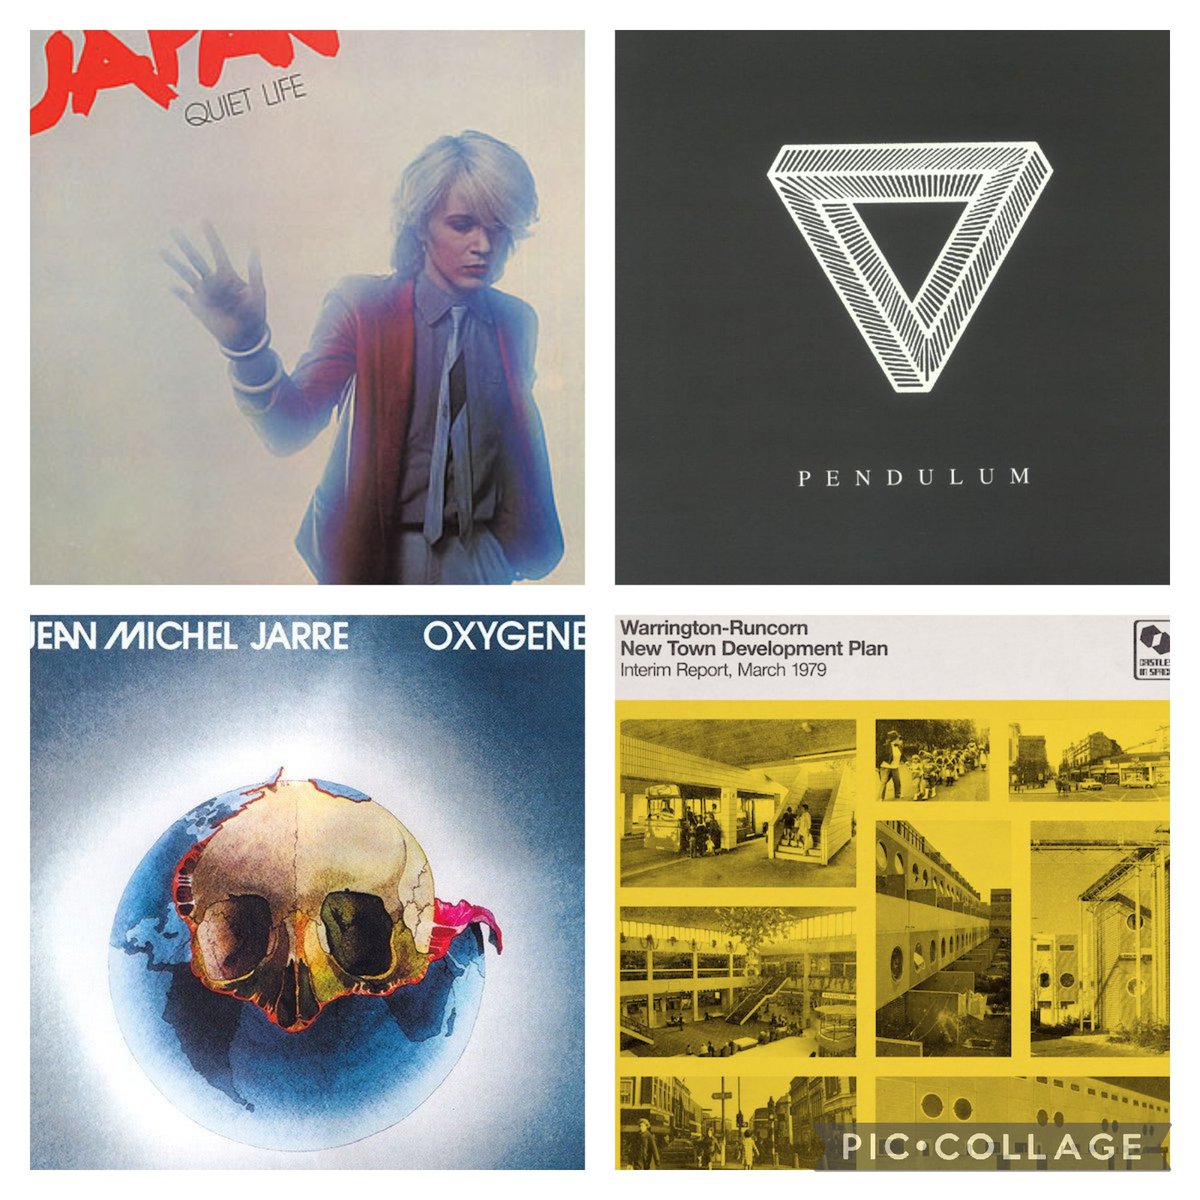 Show us the last 4 albums you listened to